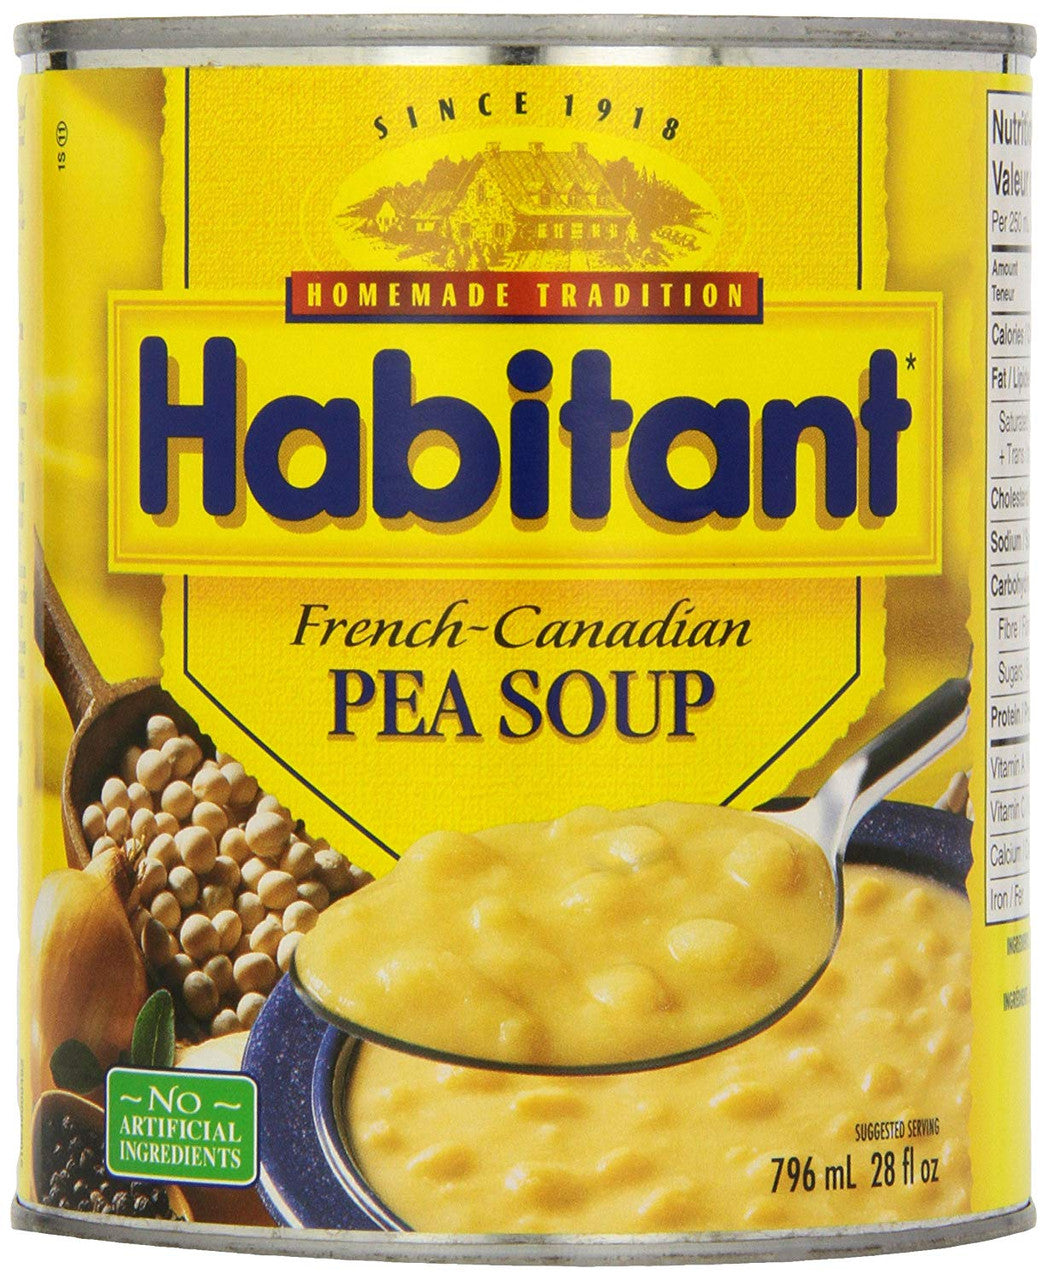 Habitant French Canadian Pea Soup, 796ml/28oz. (Imported from Canada)